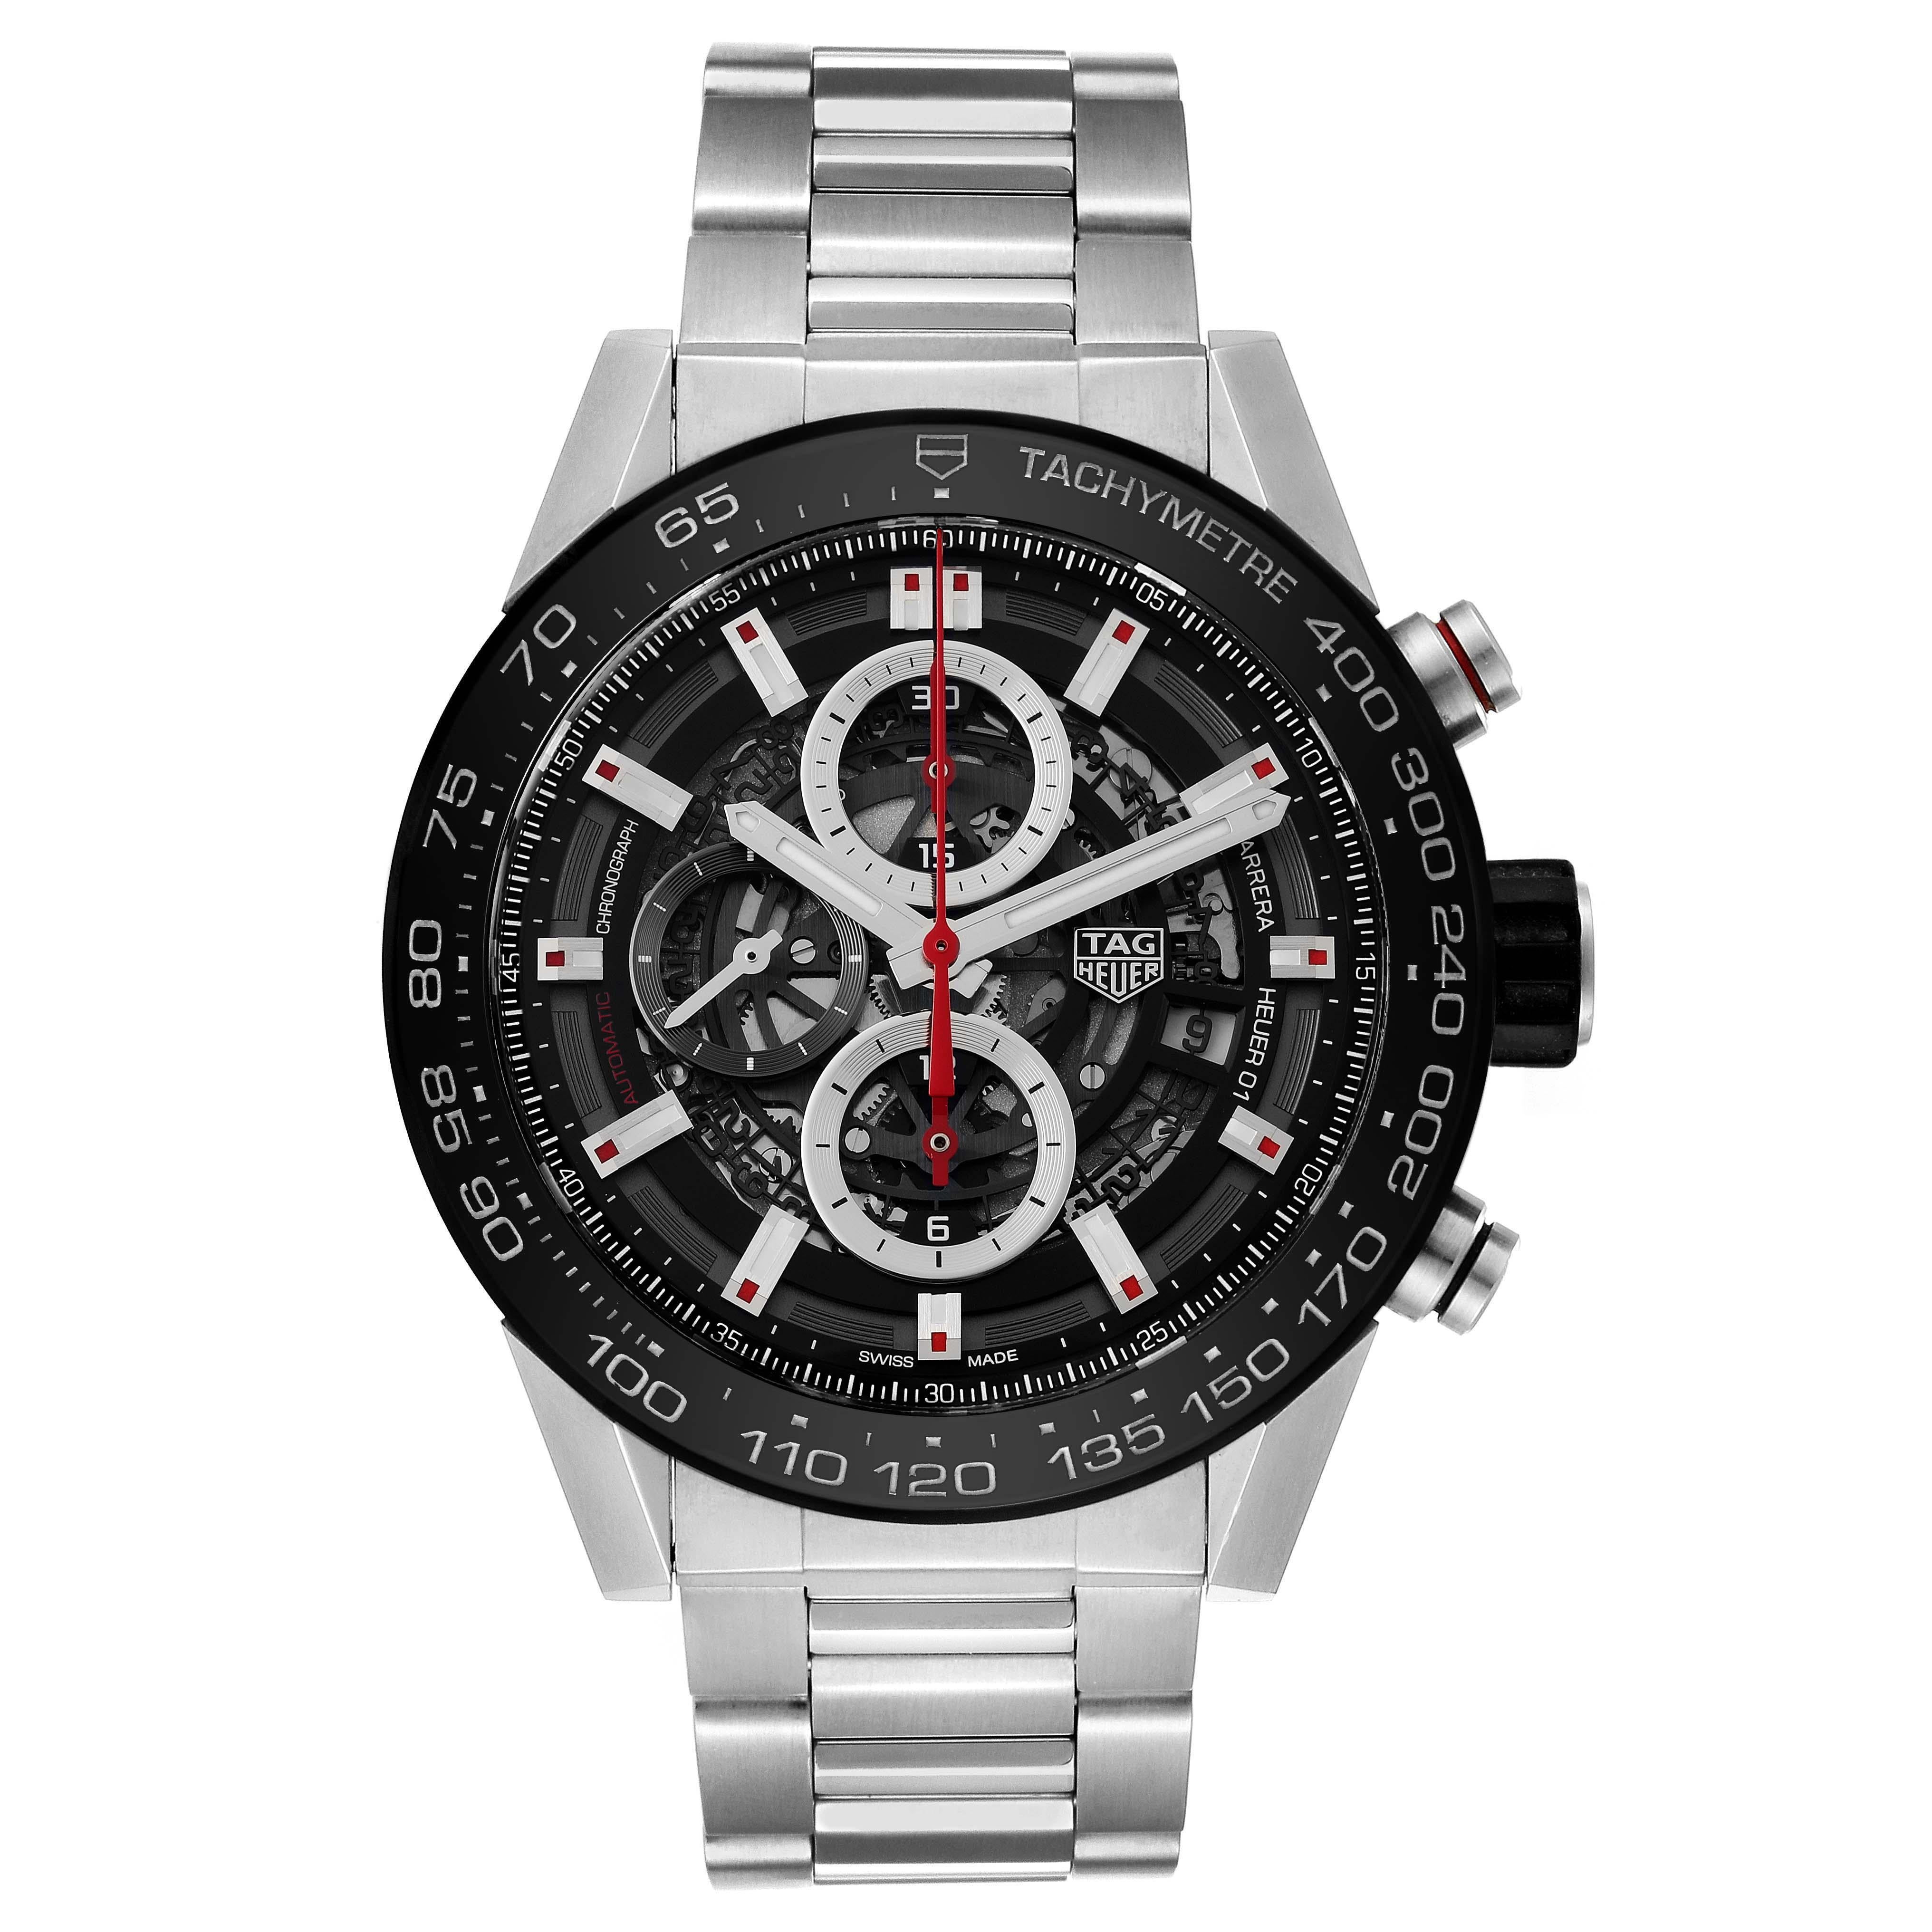 Tag Heuer Carrera Skeleton Dial Chronograph Steel Mens Watch CAR2A1W Box Card. Automatic self-winding chronograph movement. Stainless steel case 45.0 mm in diameter. Transparent exhibition sapphire crystal caseback. Black bezel with tachymeter